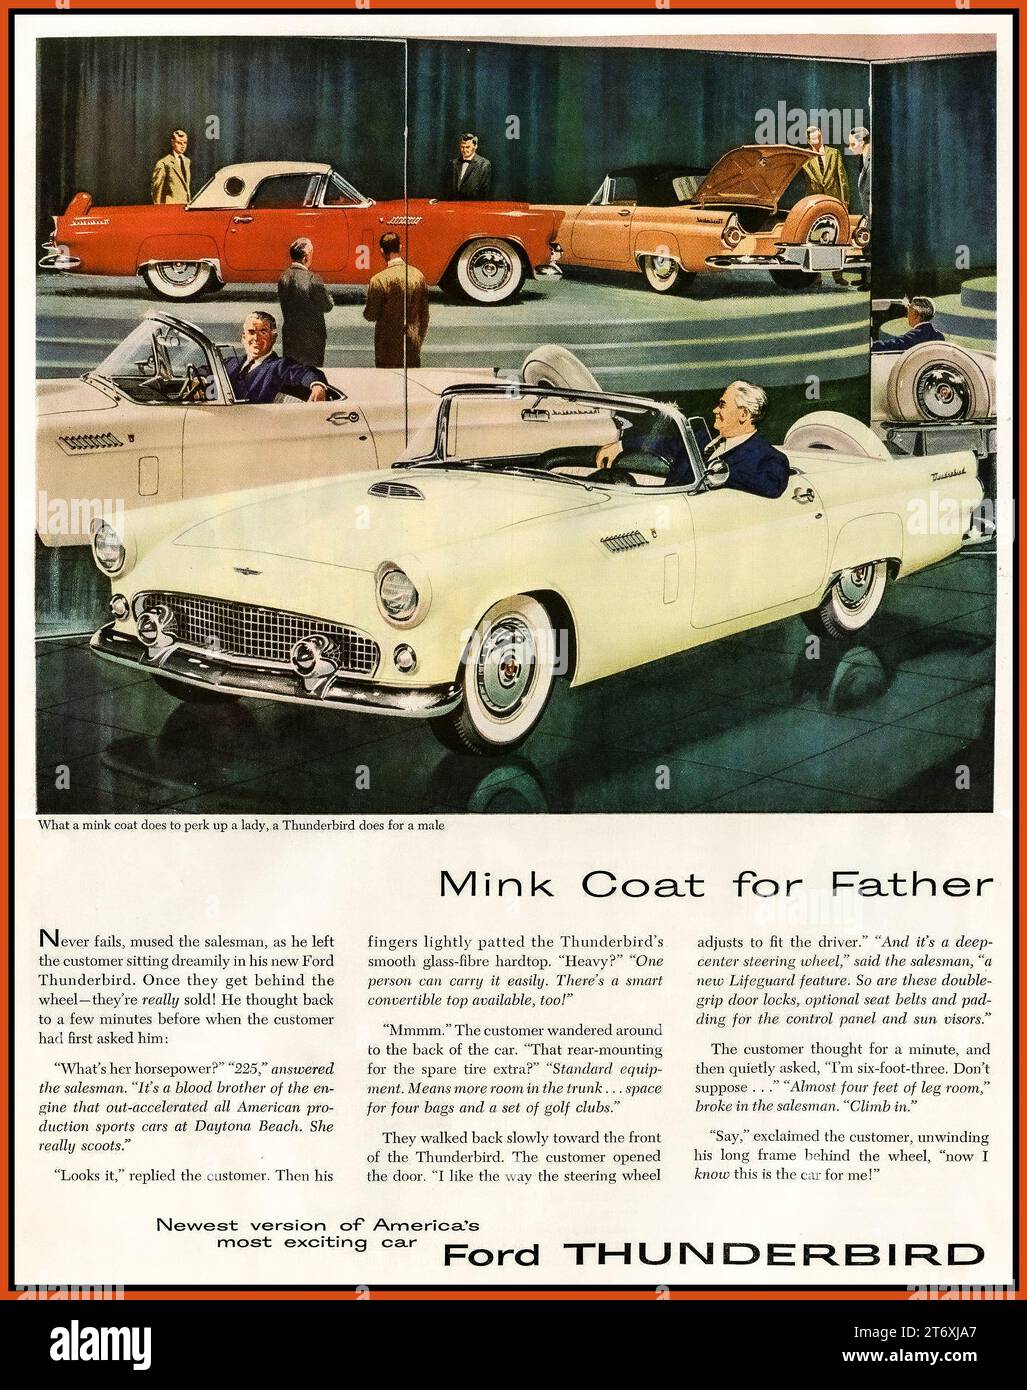 Ford Thunderbird 1950s pubblicità America USA "MINK COAT FOR FATHER" "What A MINK COAT does for a lady a Ford Thunderbird does for a man" sessista, sessista, non pc car press Foto Stock